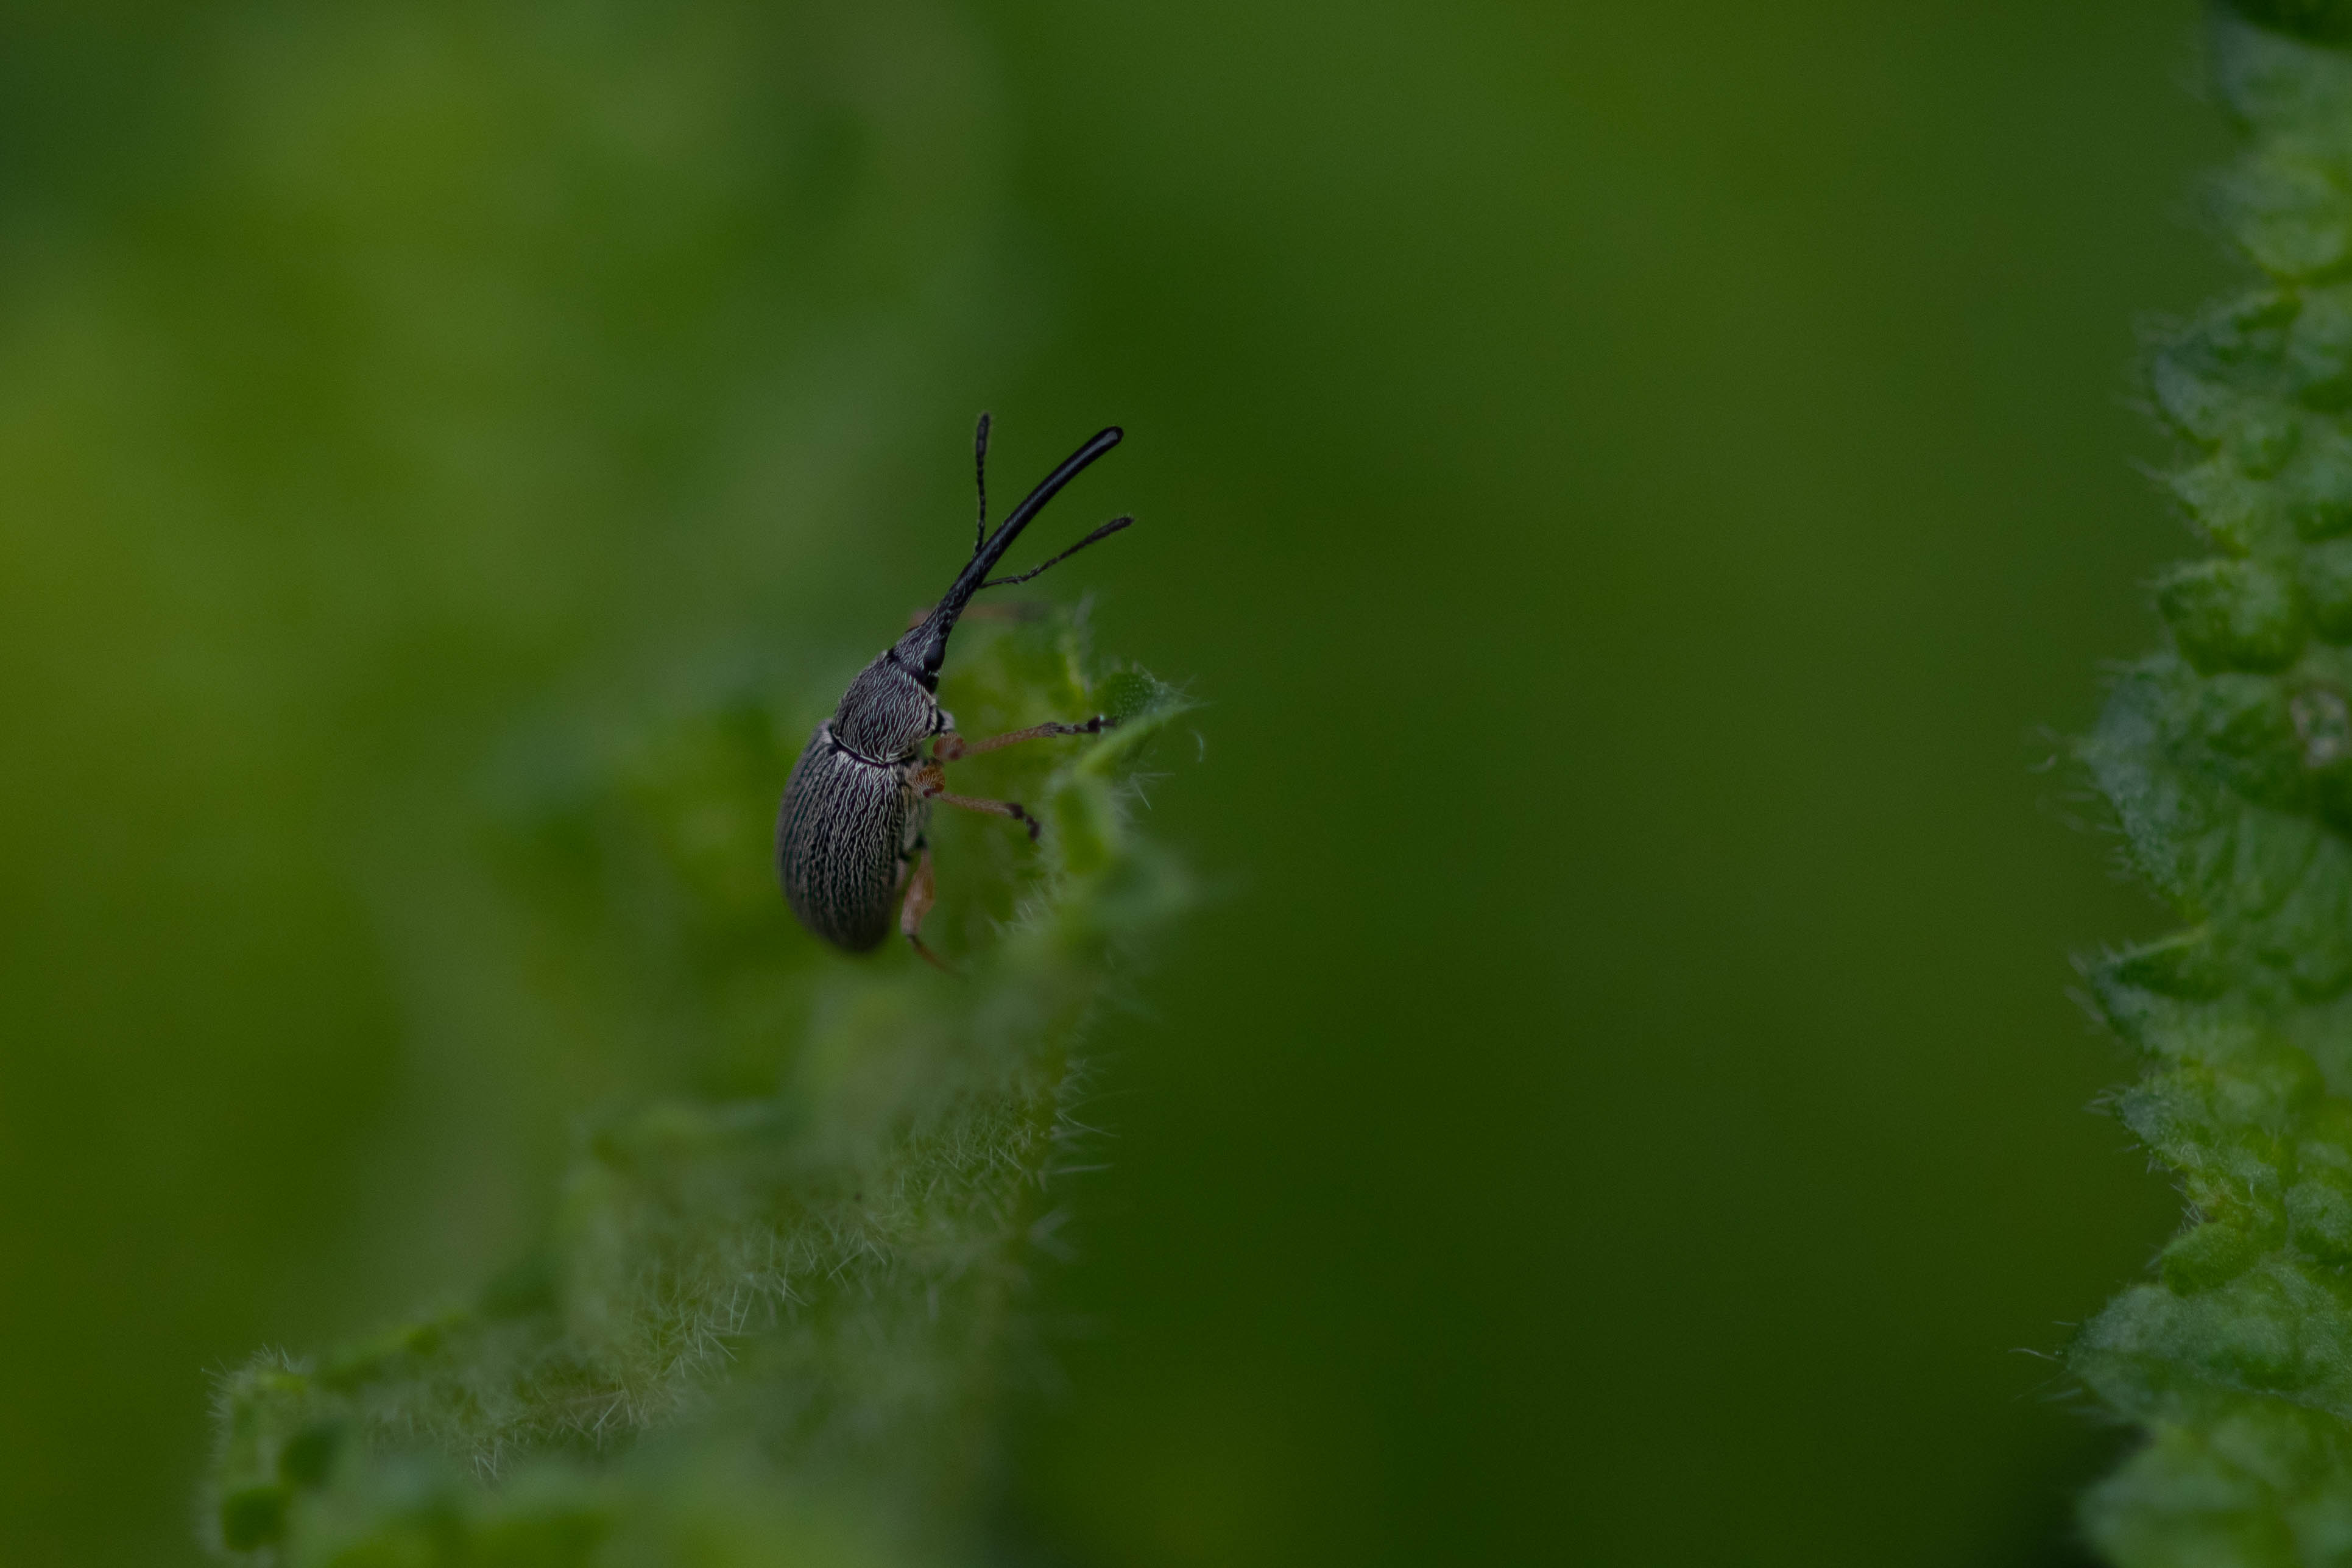 Diary of an Urban Wild Garden: See No Weevil